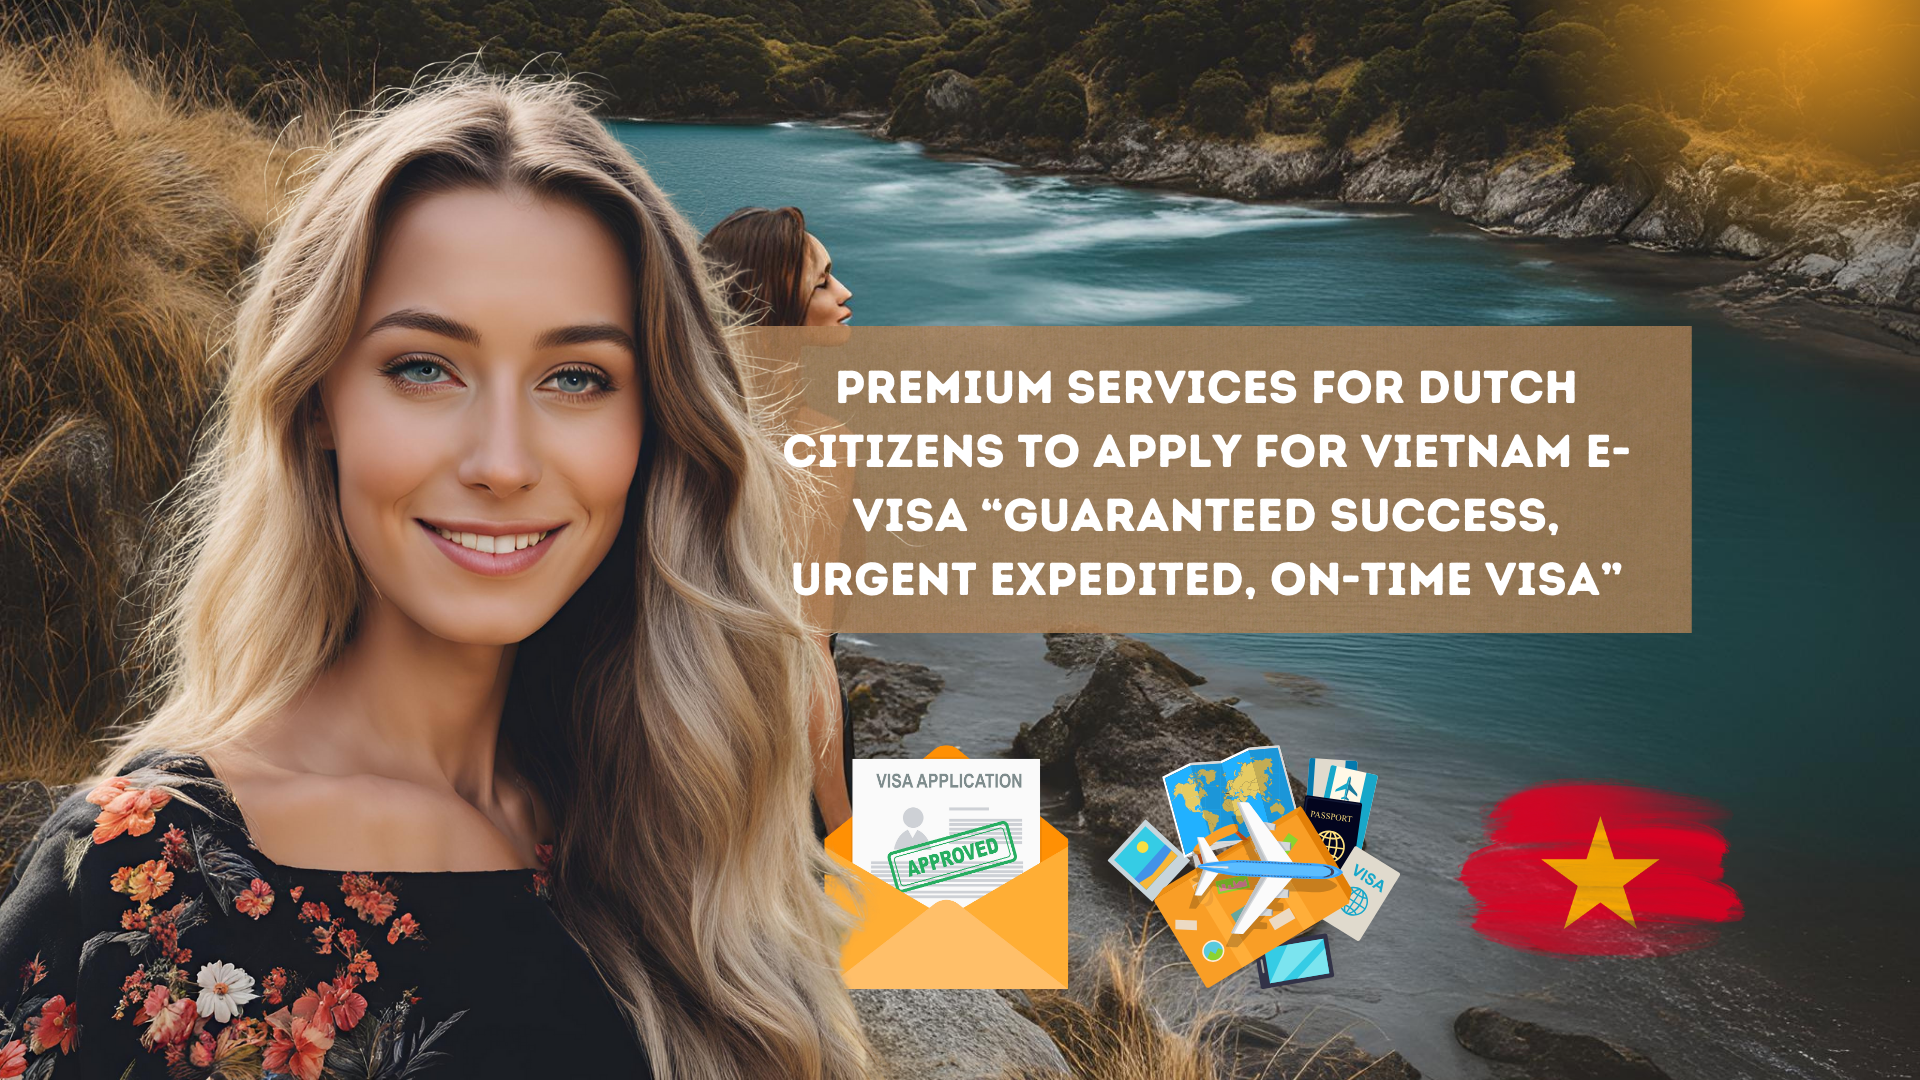 Premium Services for New Zealand Citizens to apply for Vietnam e-visa “Guaranteed success, urgent expedited, on-time visa”